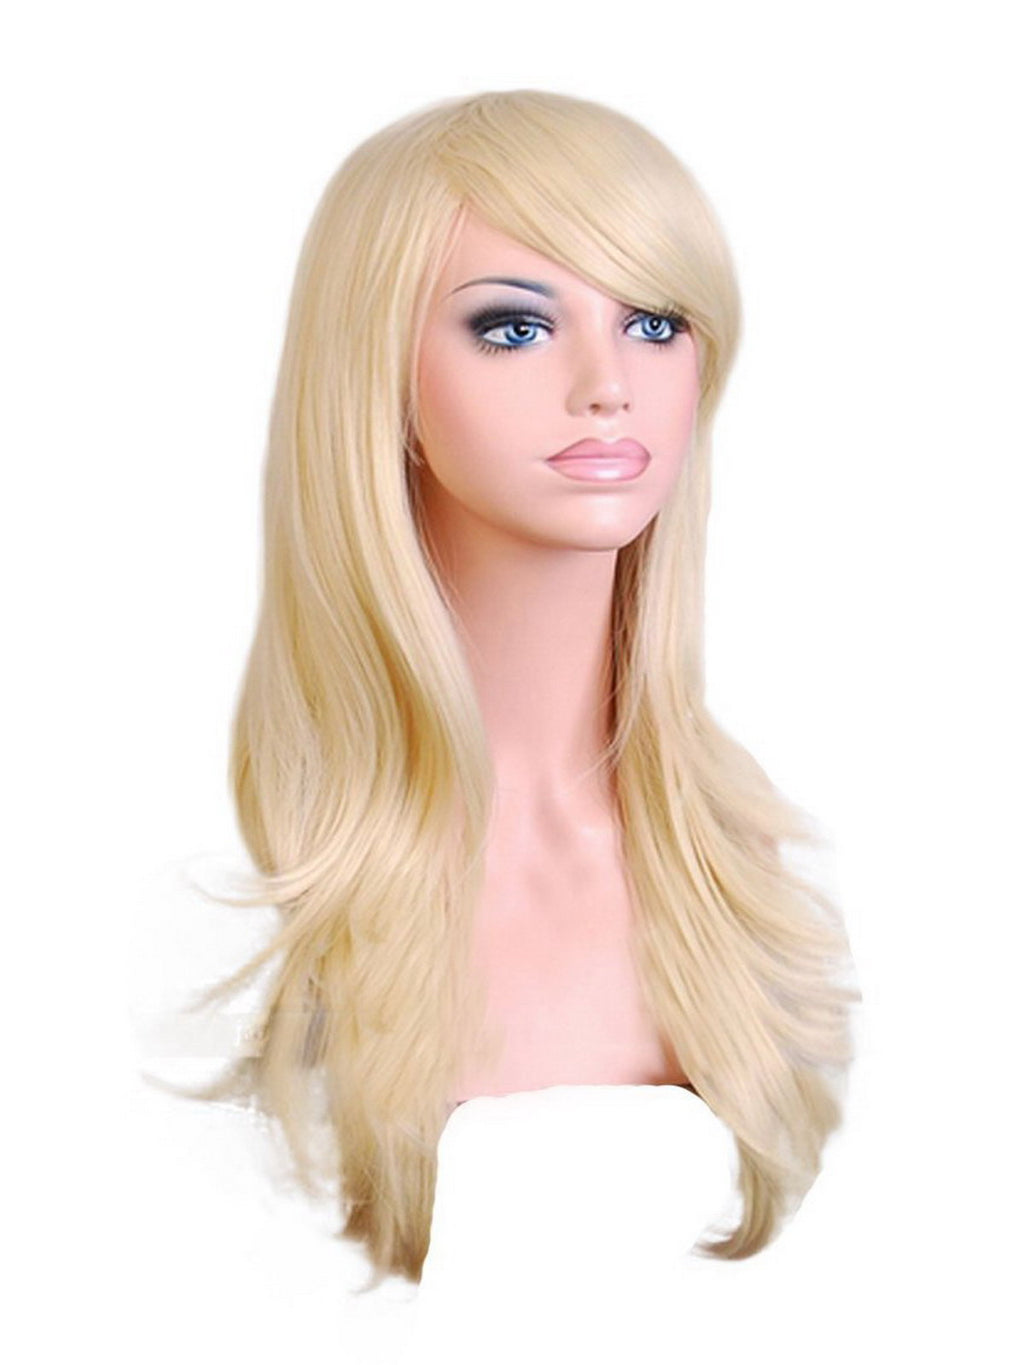 Blonde long wig transformation parts for party costume Crossdress Cosplay TG CD Dragqueen Ladyboy